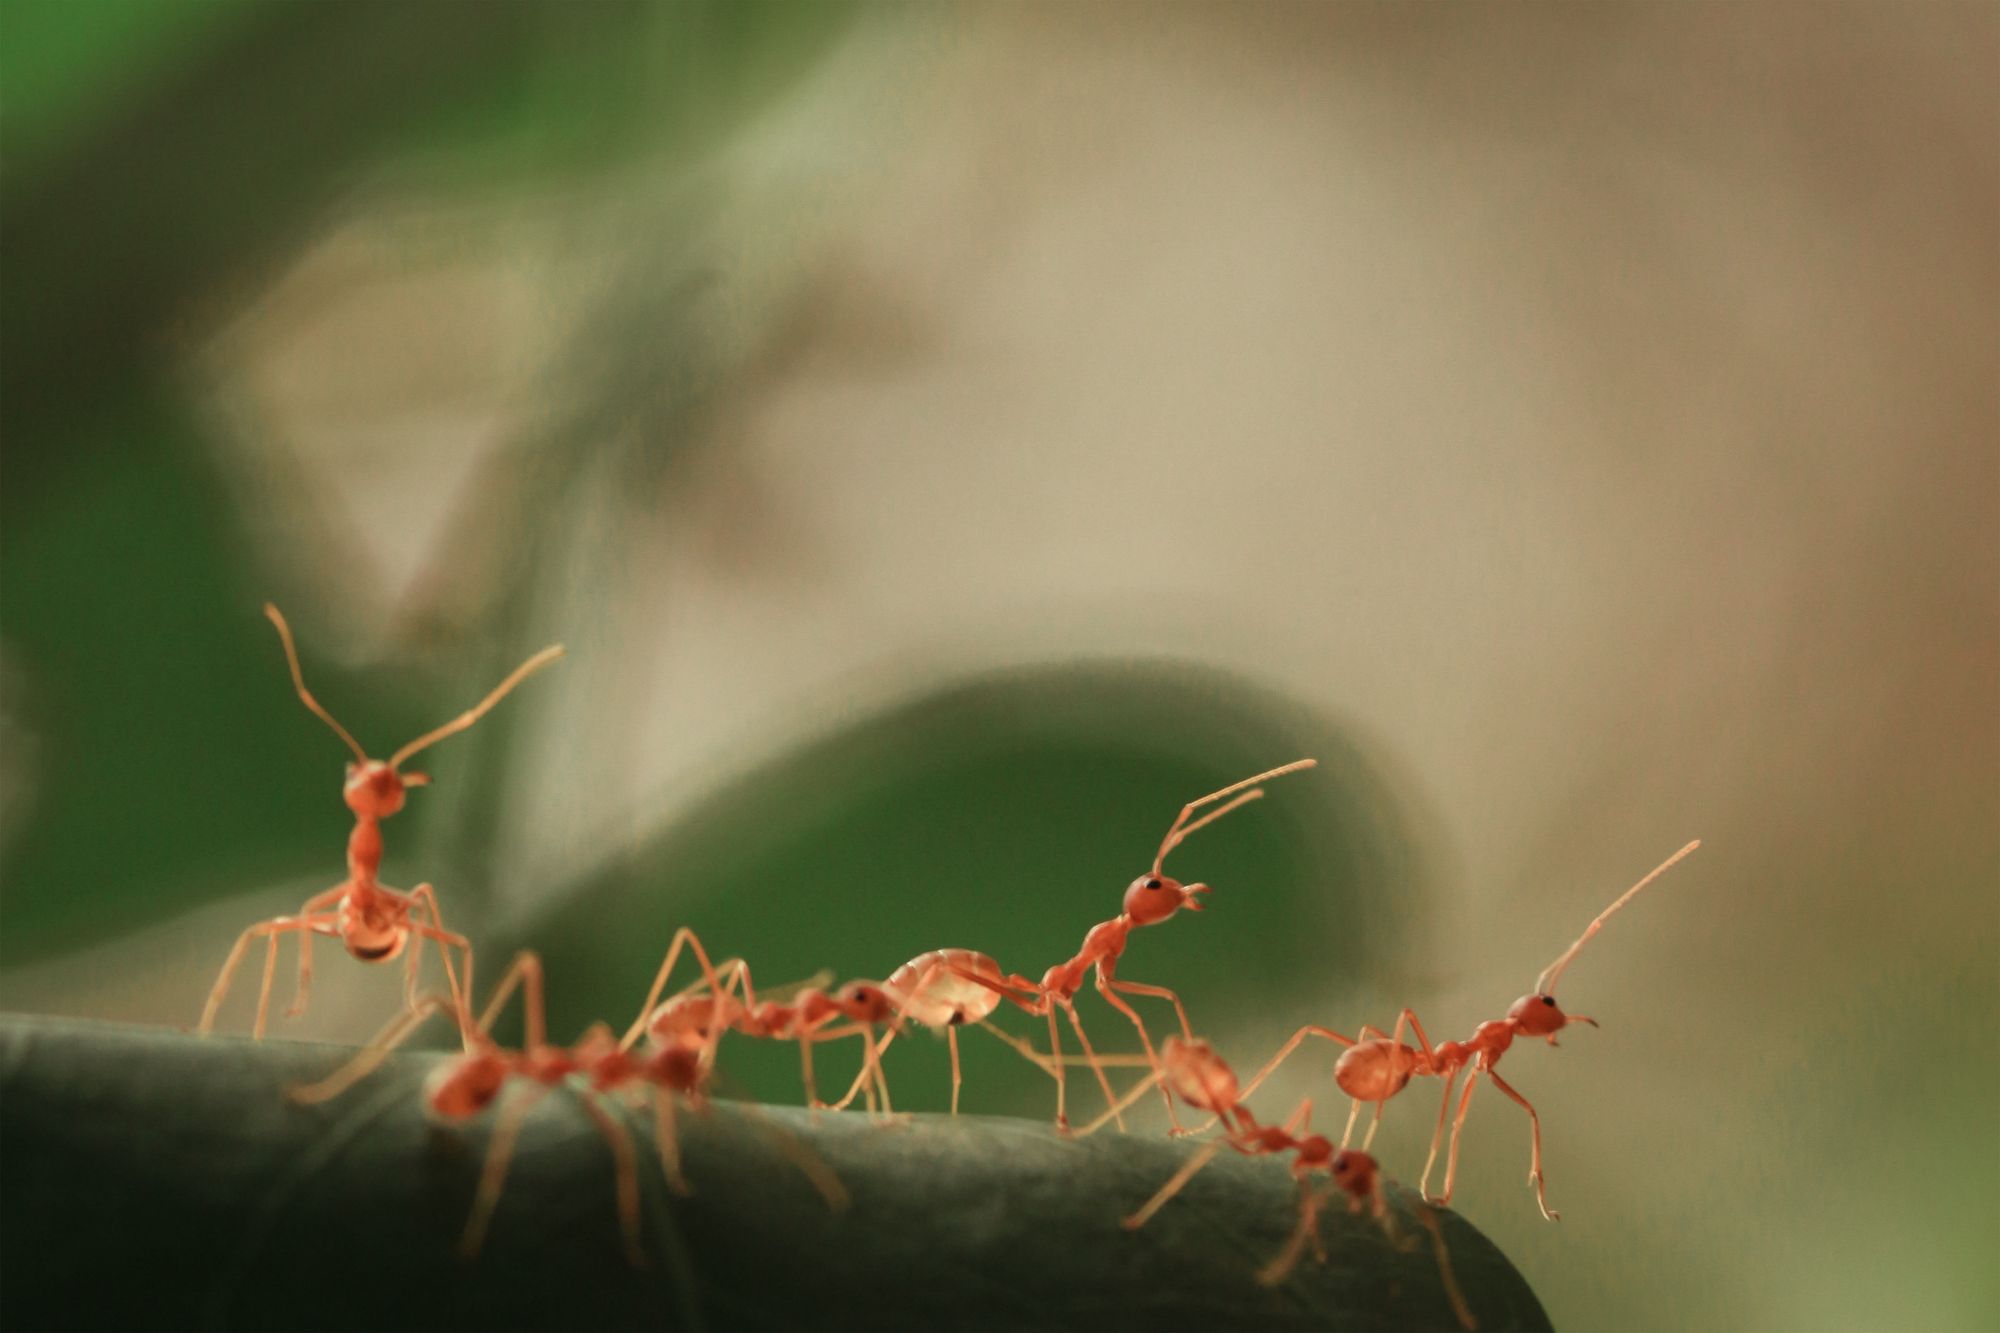 How to Get Rid of Ants in Your Yard Naturally